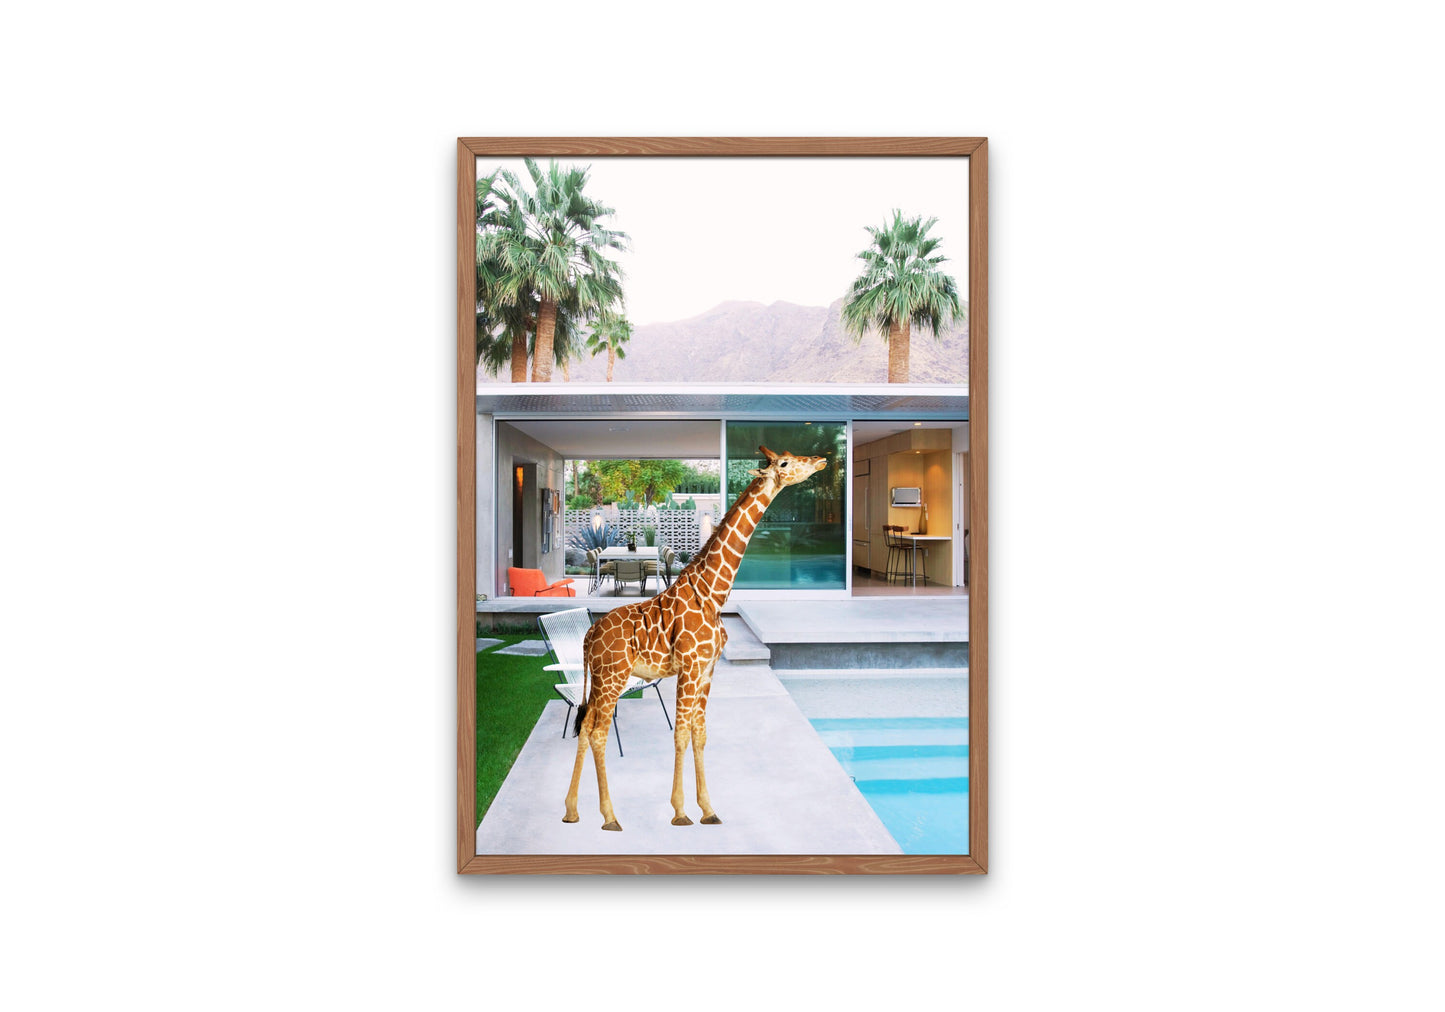 Giraffe in Palm Springs Art Deco Home INSTANT DOWNLOAD, Desert poster, one piece poster, giraffe picture, animal lover, palm springs